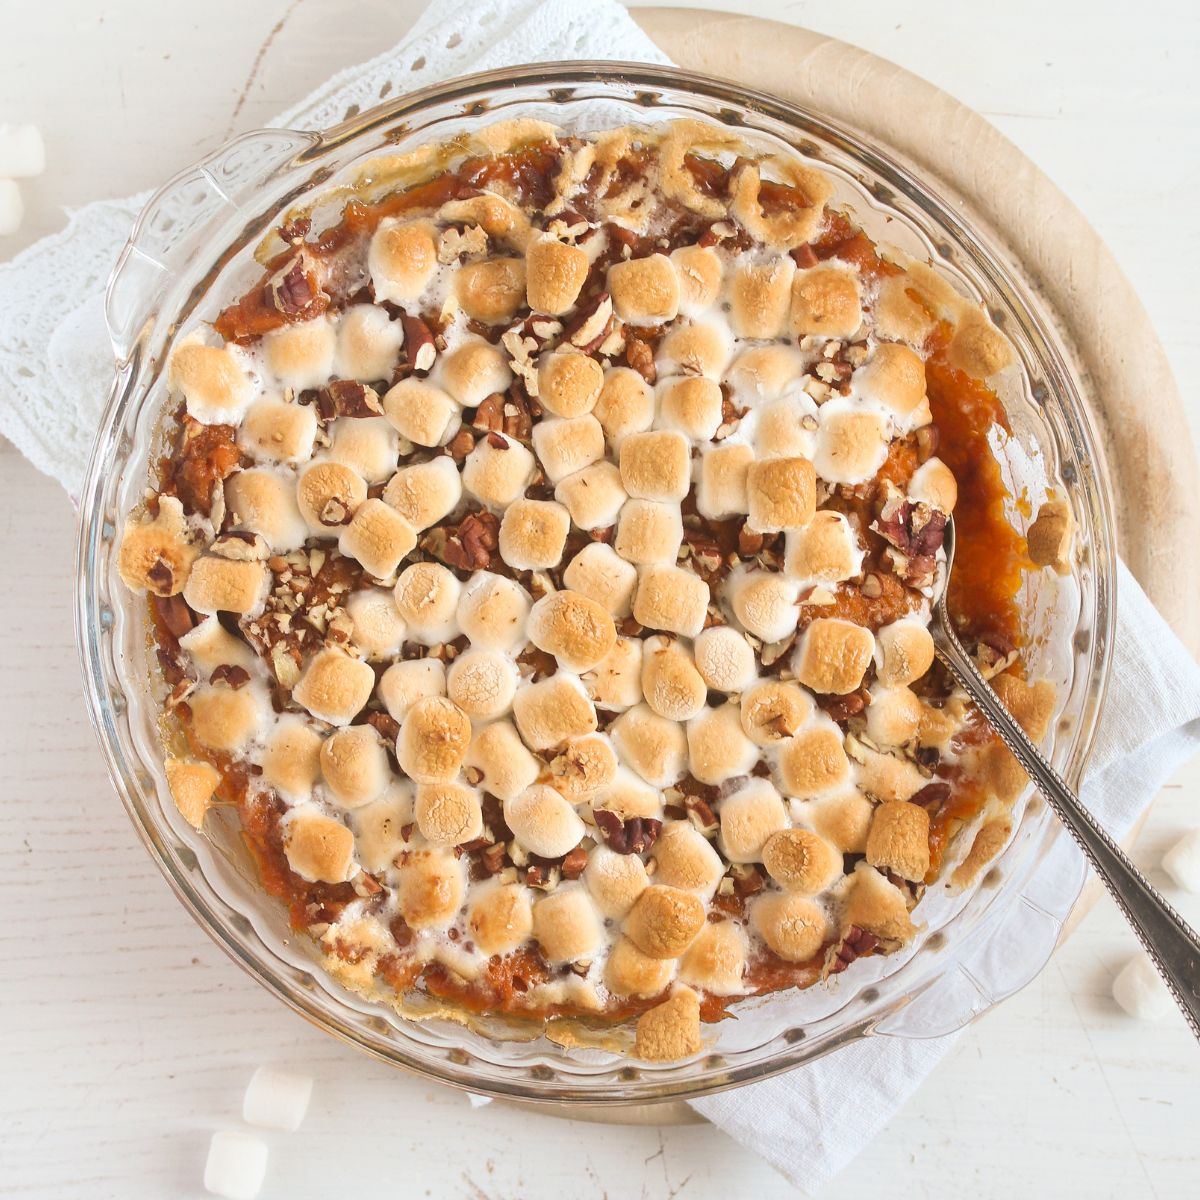 old fashioned sweet potato casserole topped with marshmallows.